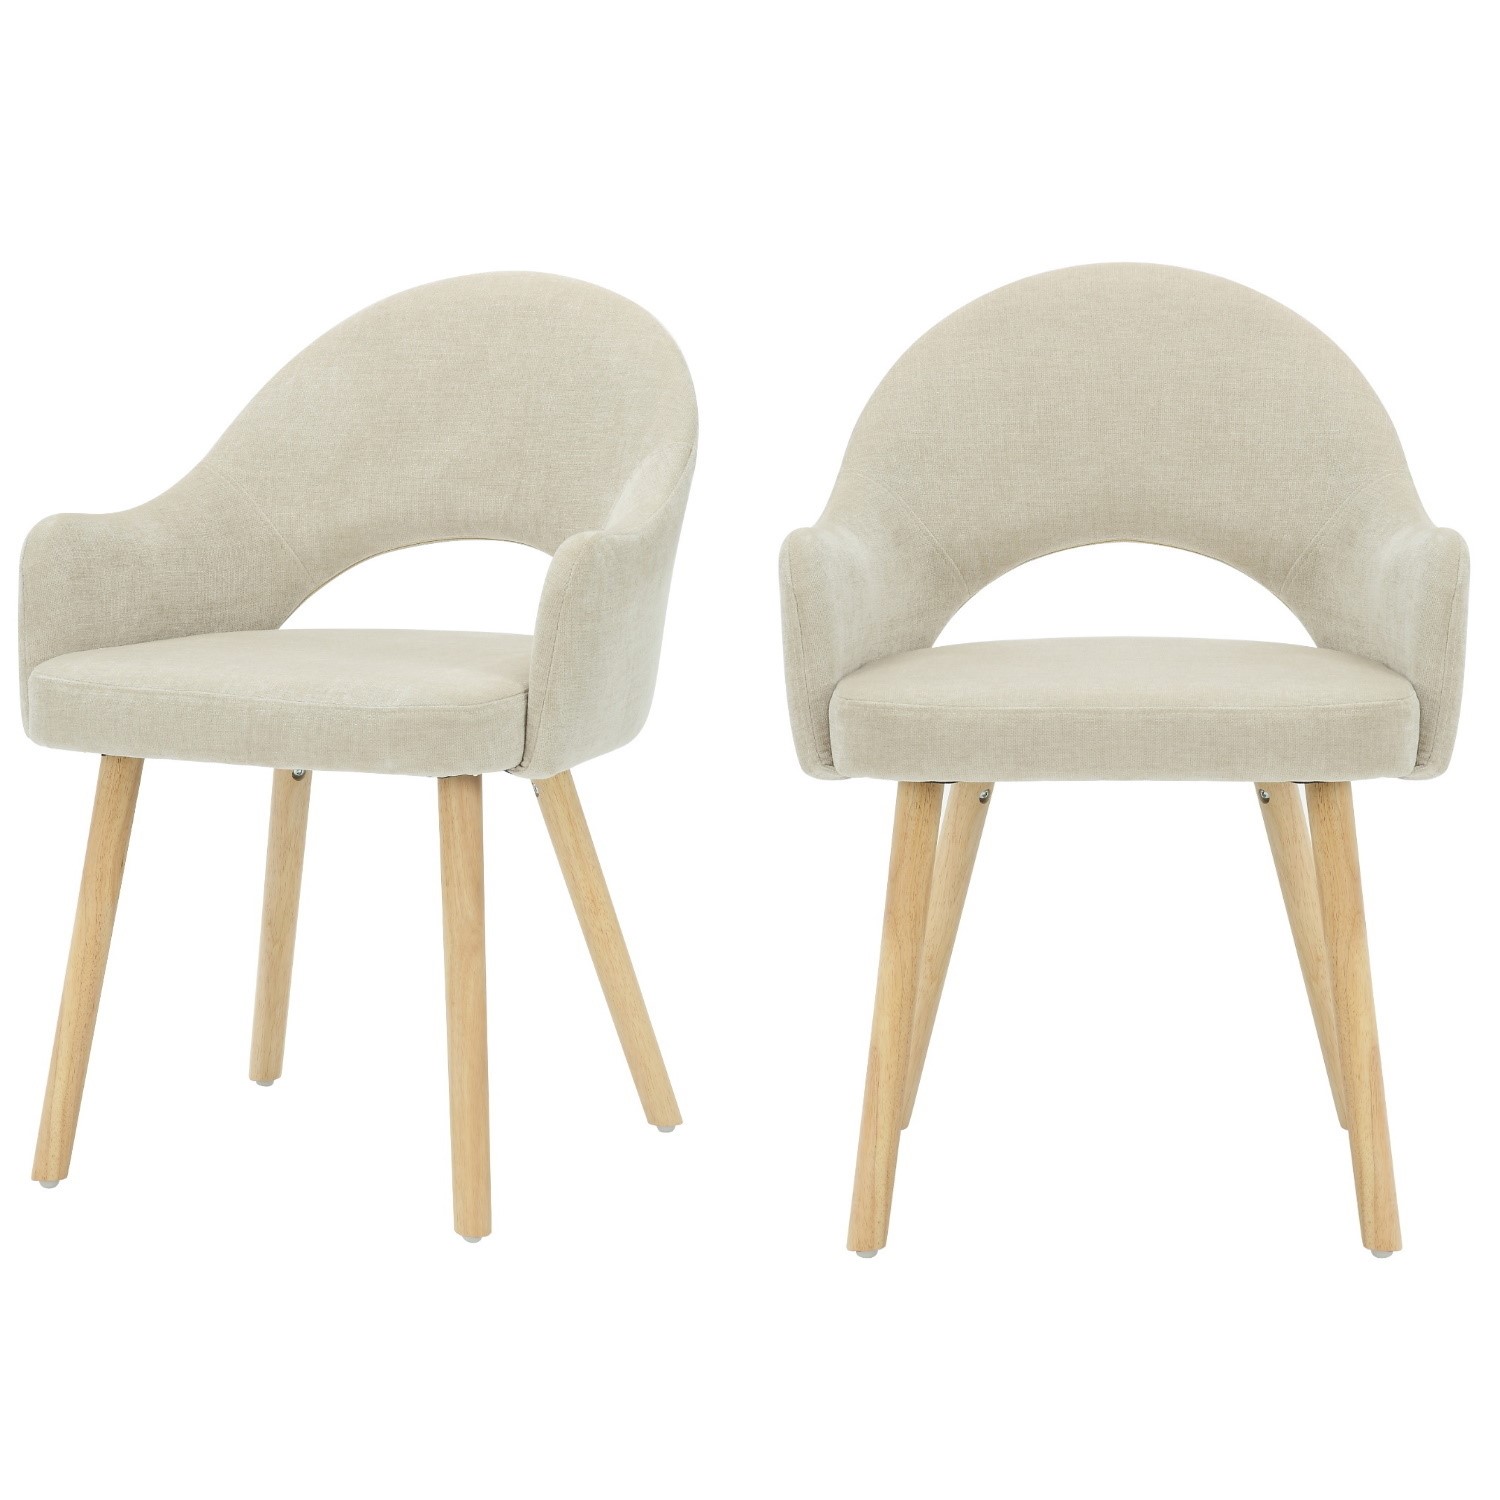 Photo of Set of 2 beige fabric dining chairs with oak legs - colbie